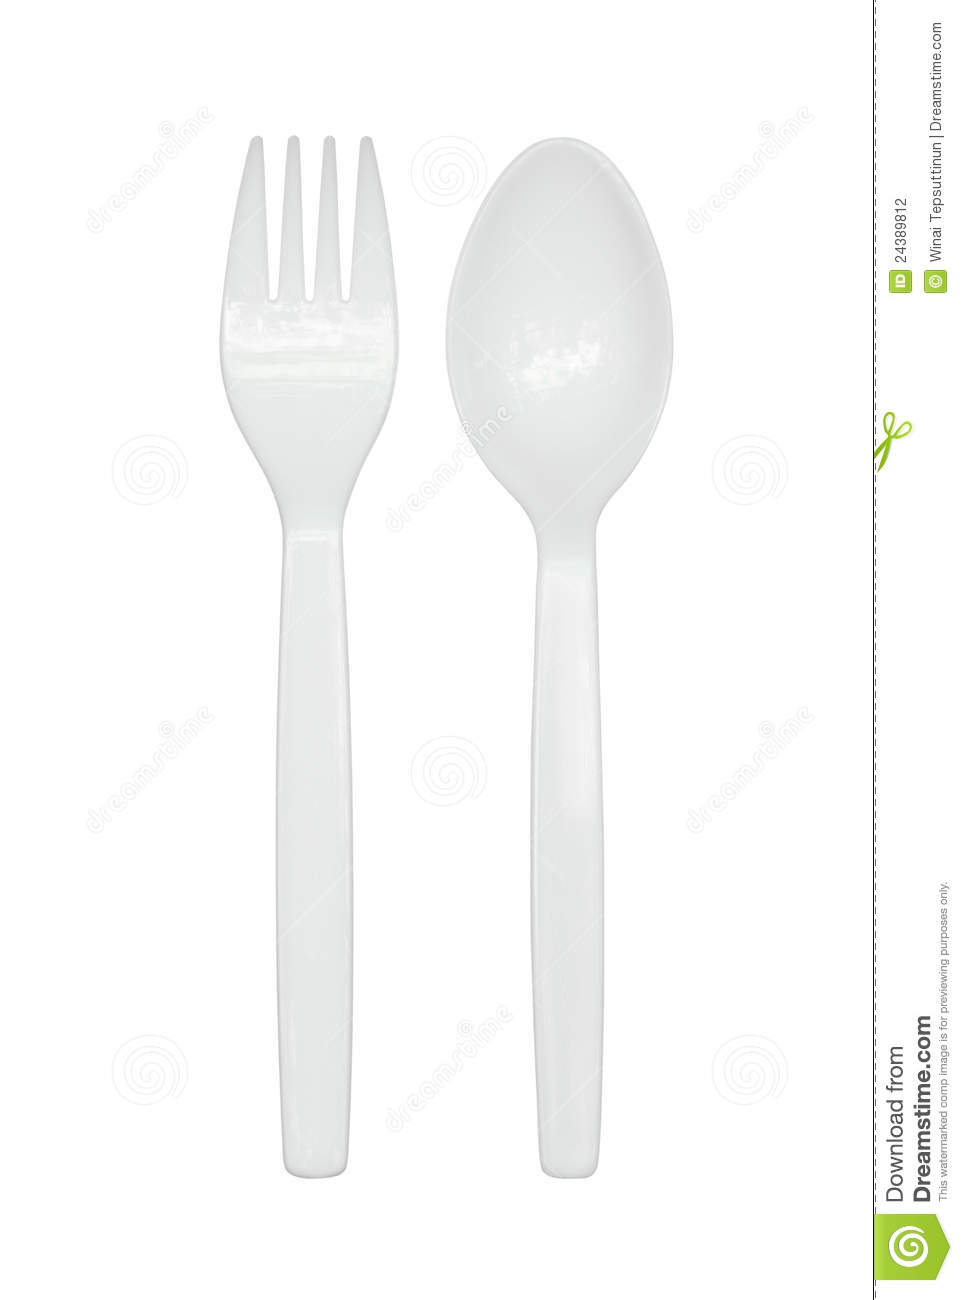 Plastic Spoon And Fork Stock Photography   Image  24389812